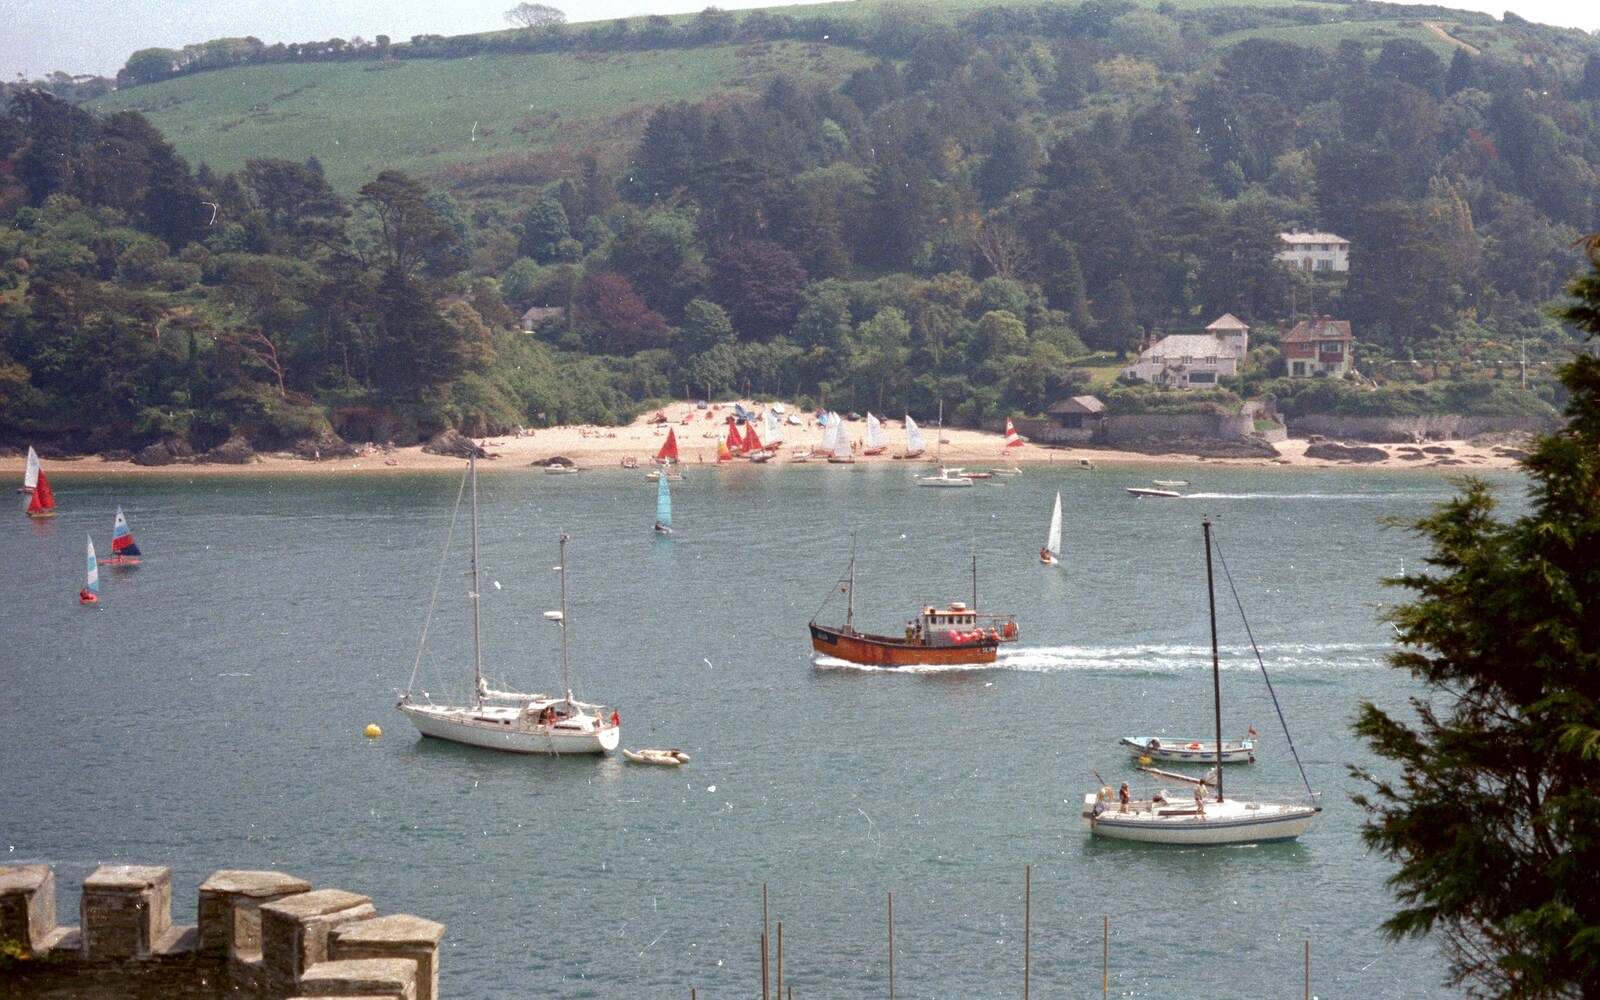 Fishing boats and yachts in Salcombe Harbour from Uni: Twenty One Guns and Footie on the Beach, Plymouth Hoe and Salcombe, Devon - 15th June 1986